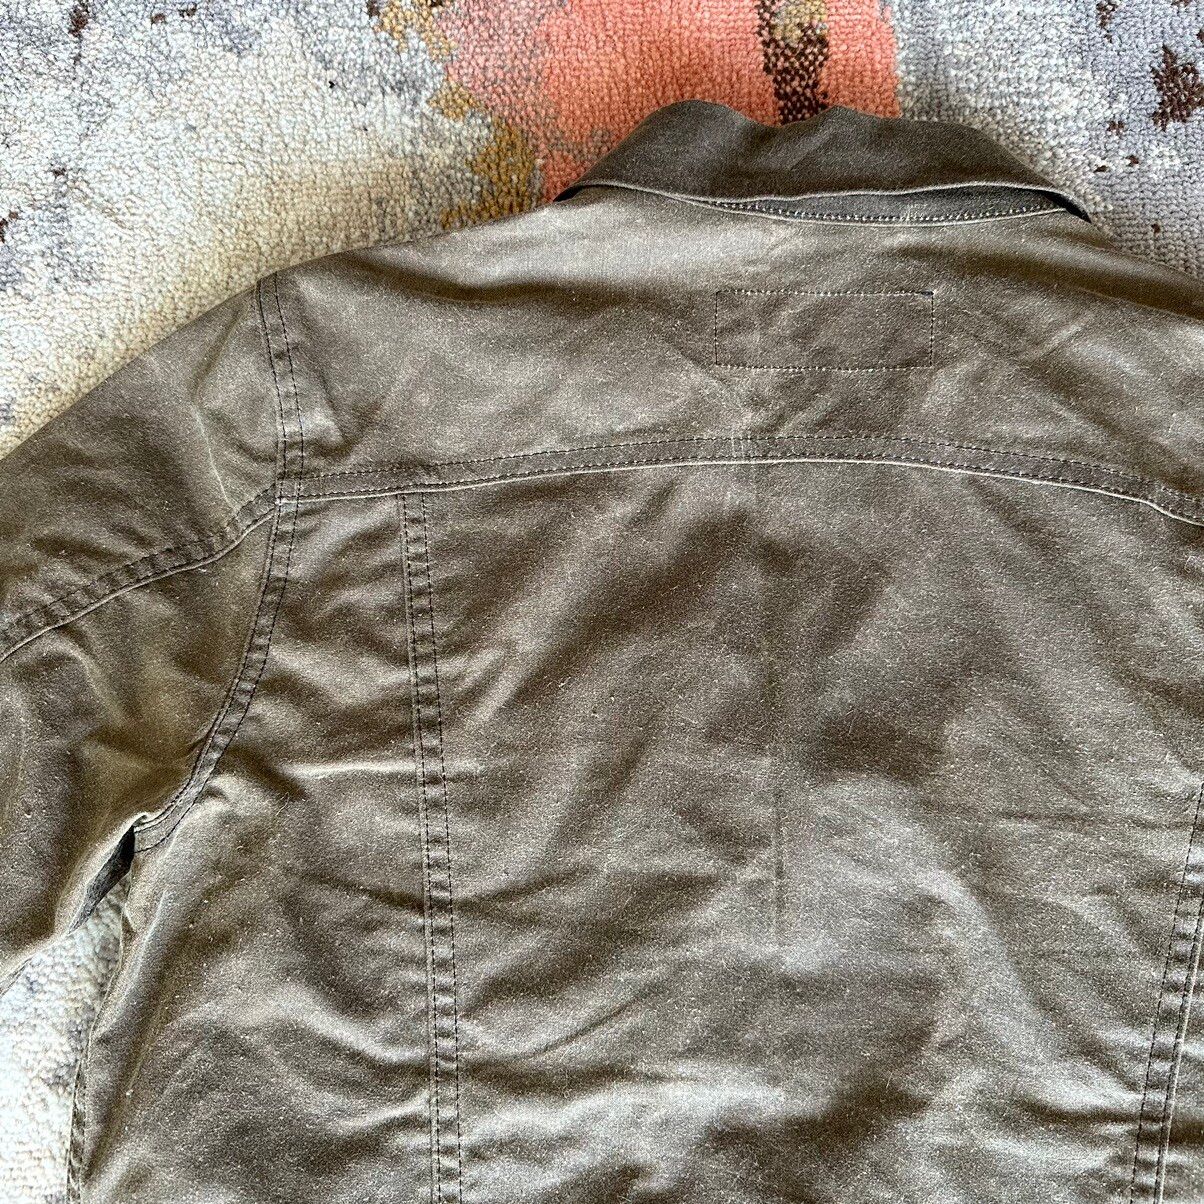 Rogue Territory Rogue Territory Supply Jacket - Brown Ridgeline Size US M / EU 48-50 / 2 - 5 Preview